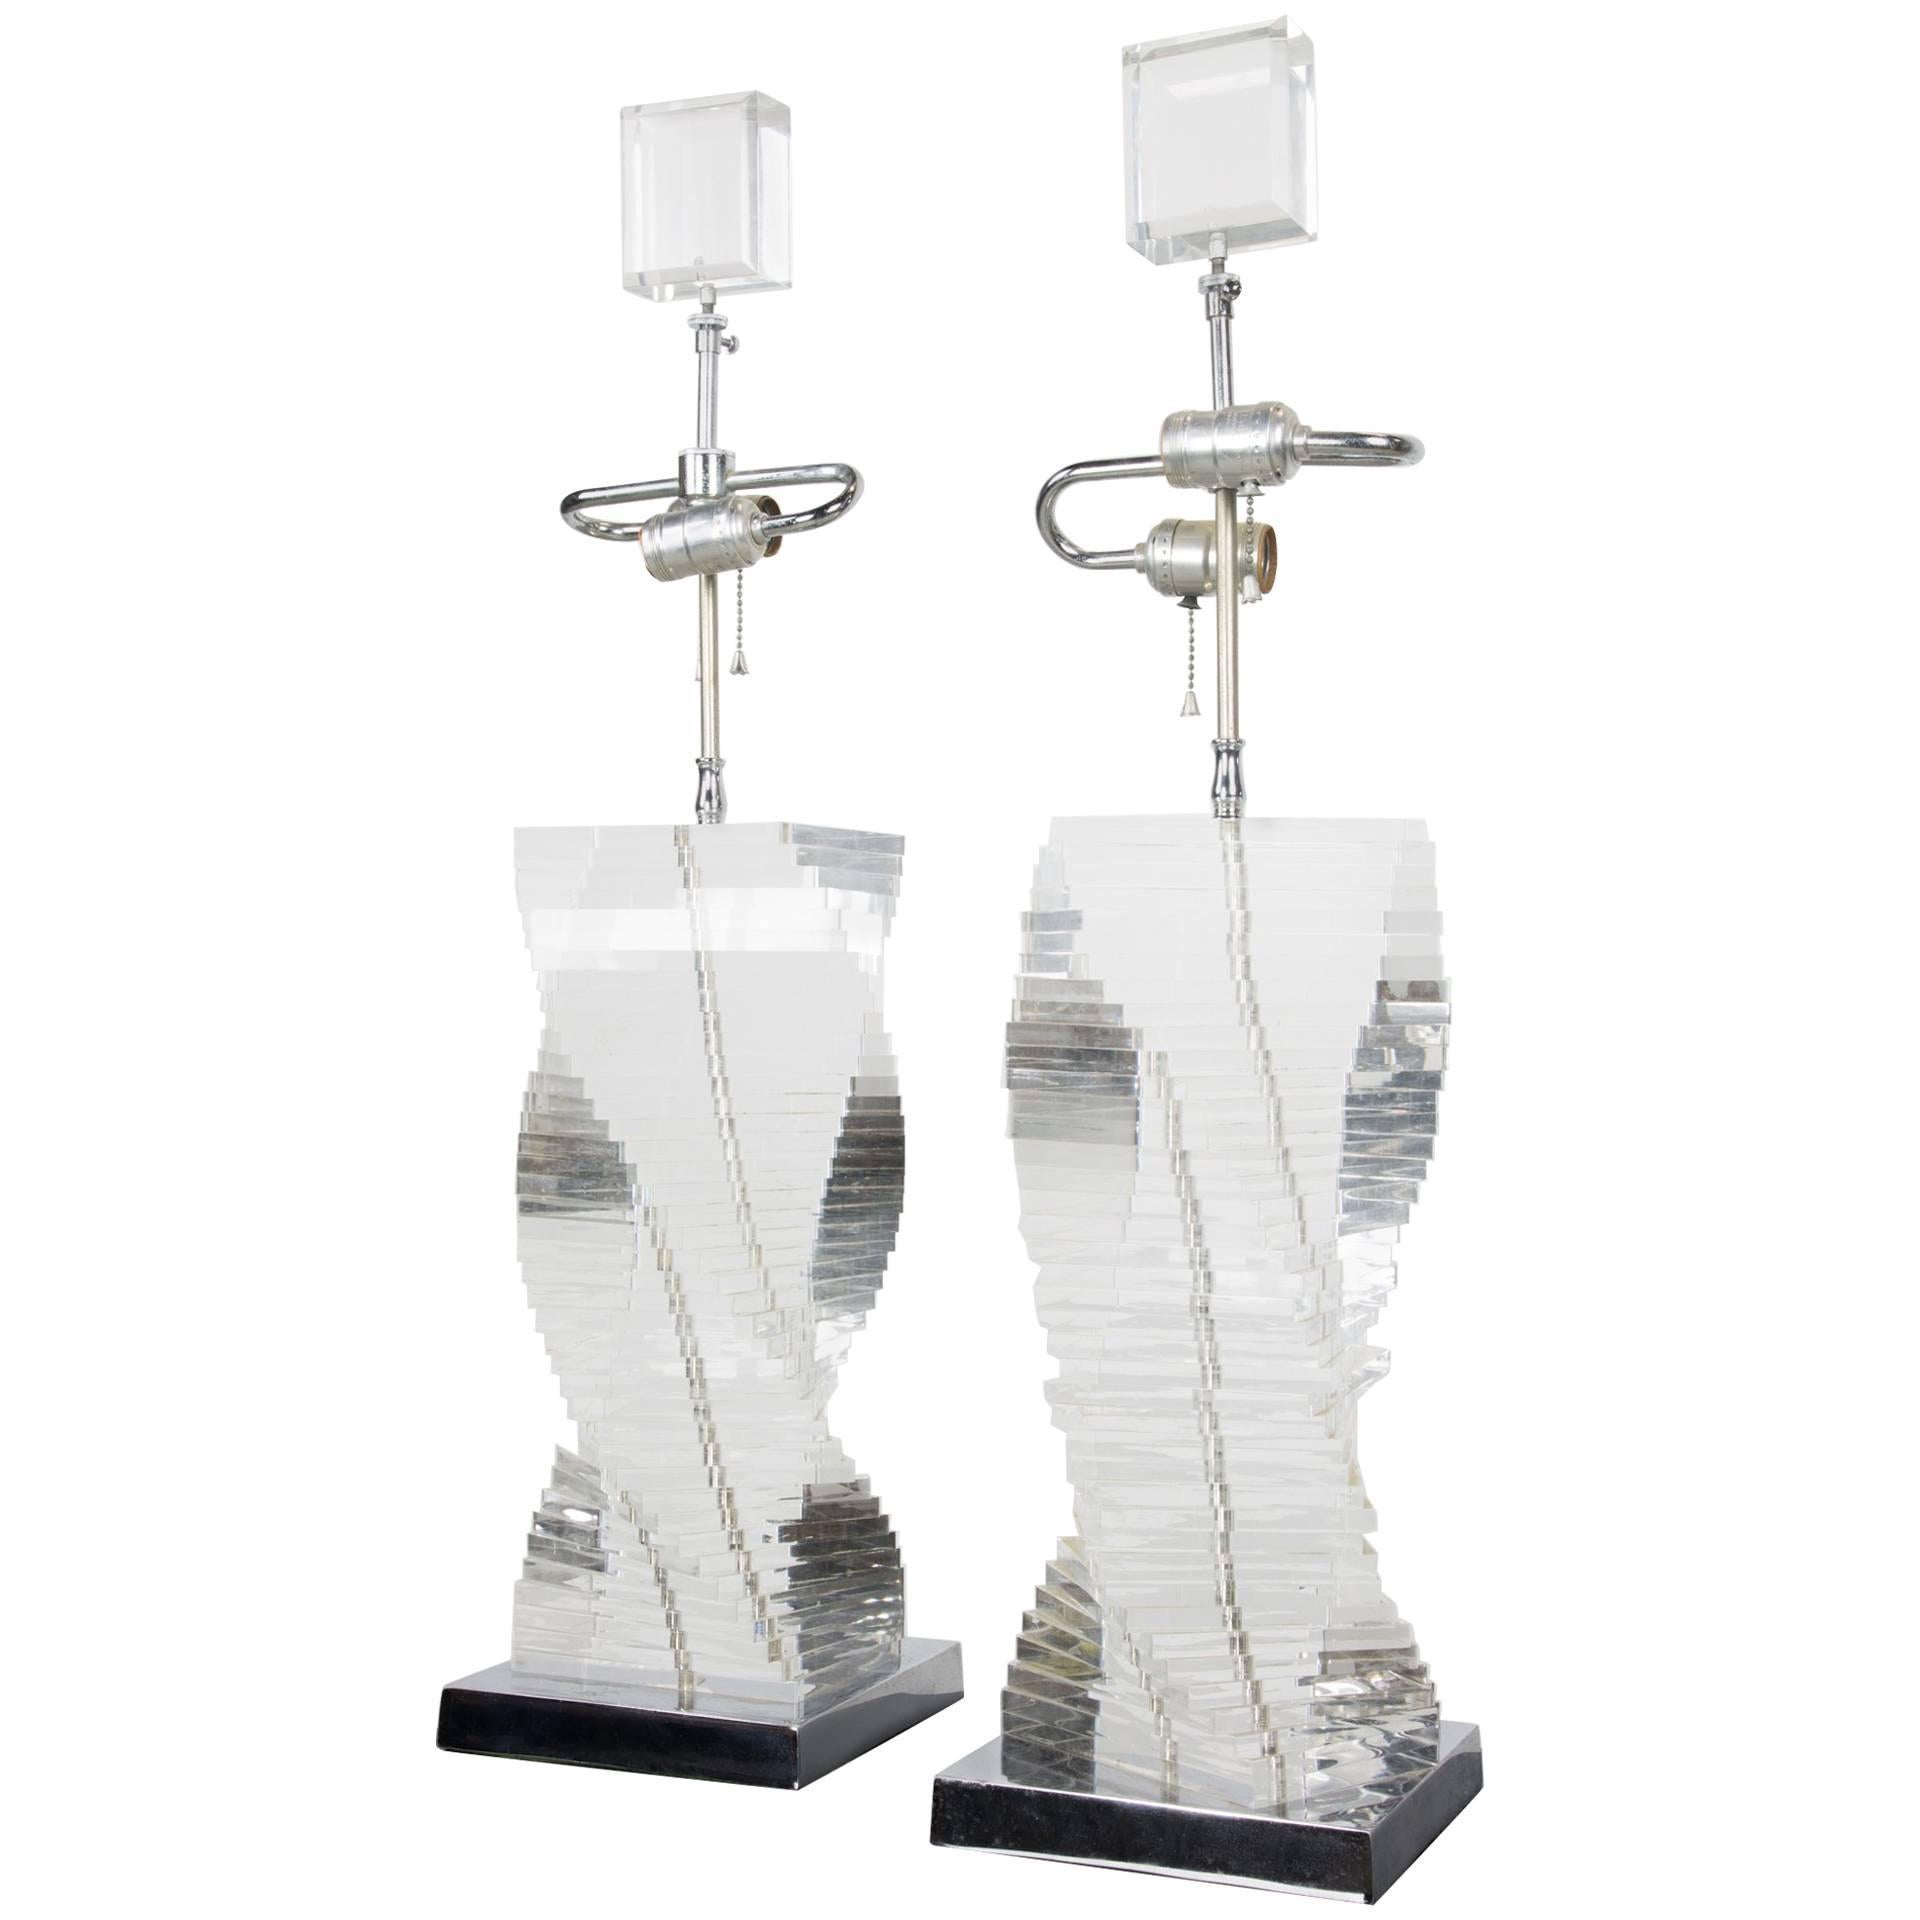 Pair of Stacked Lucite Helix Table Lamps